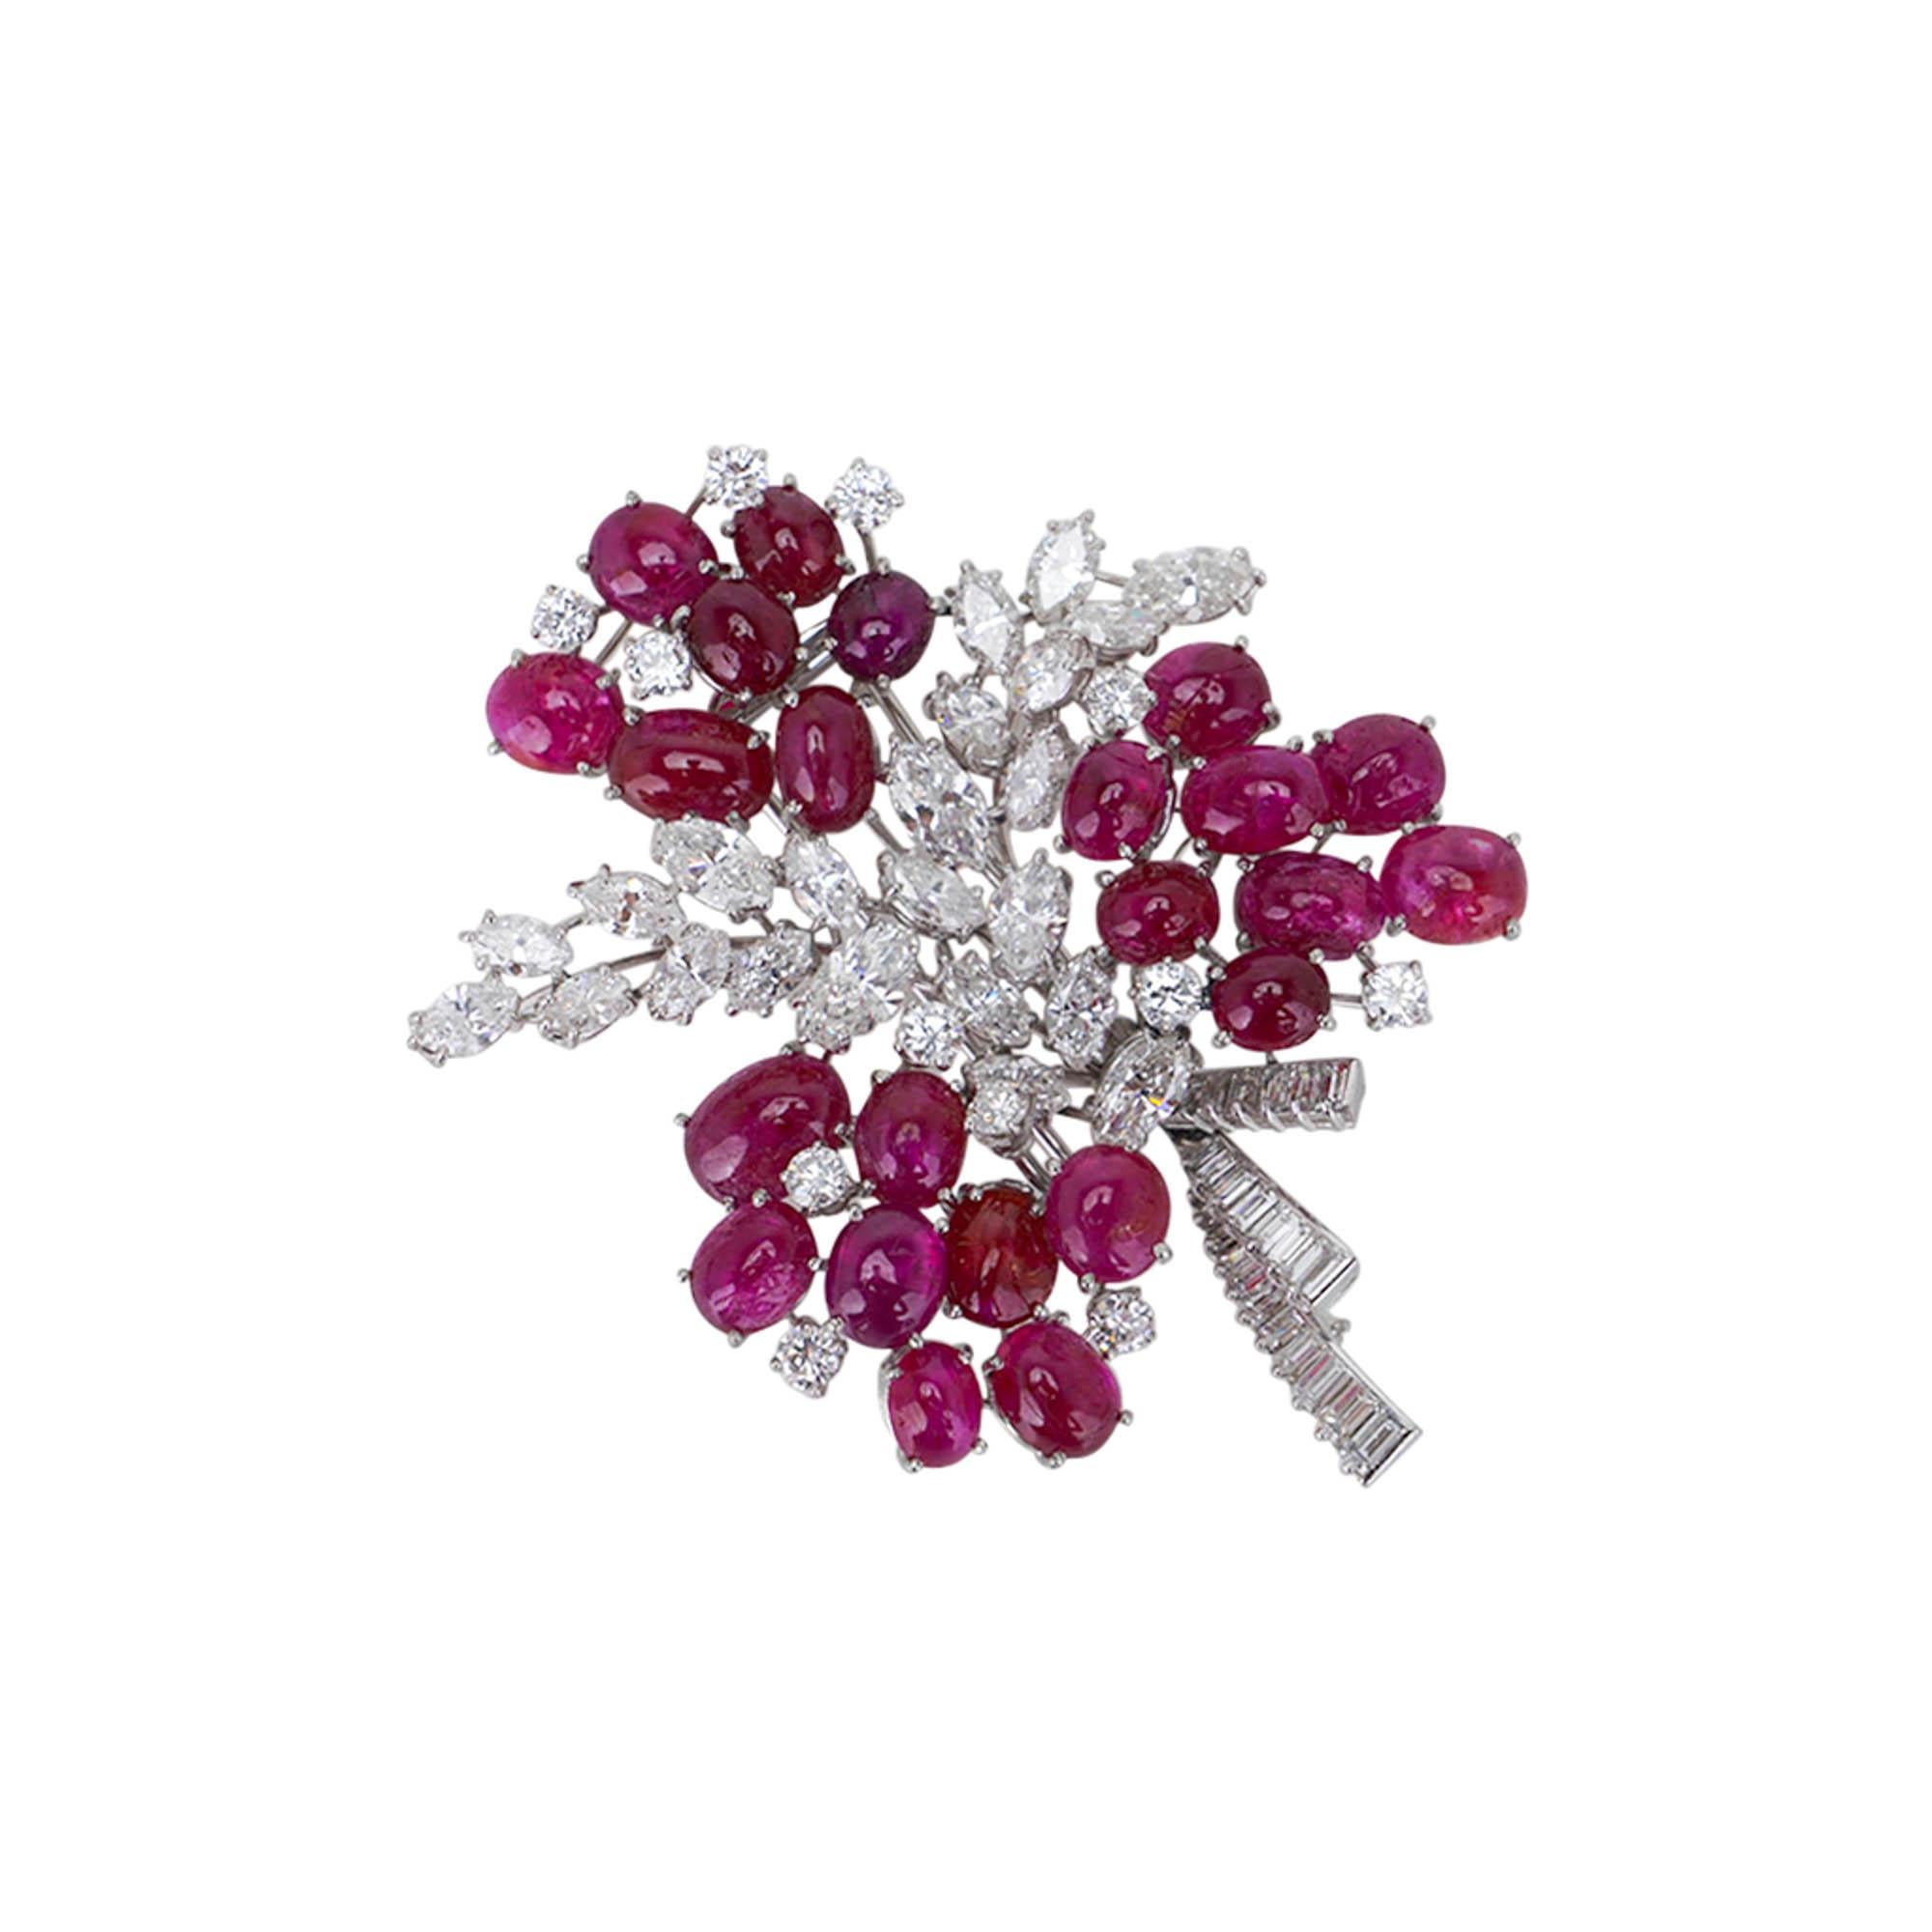 Women's Diamond and Ruby Platinum Setting Vintage Brooch Floral Design